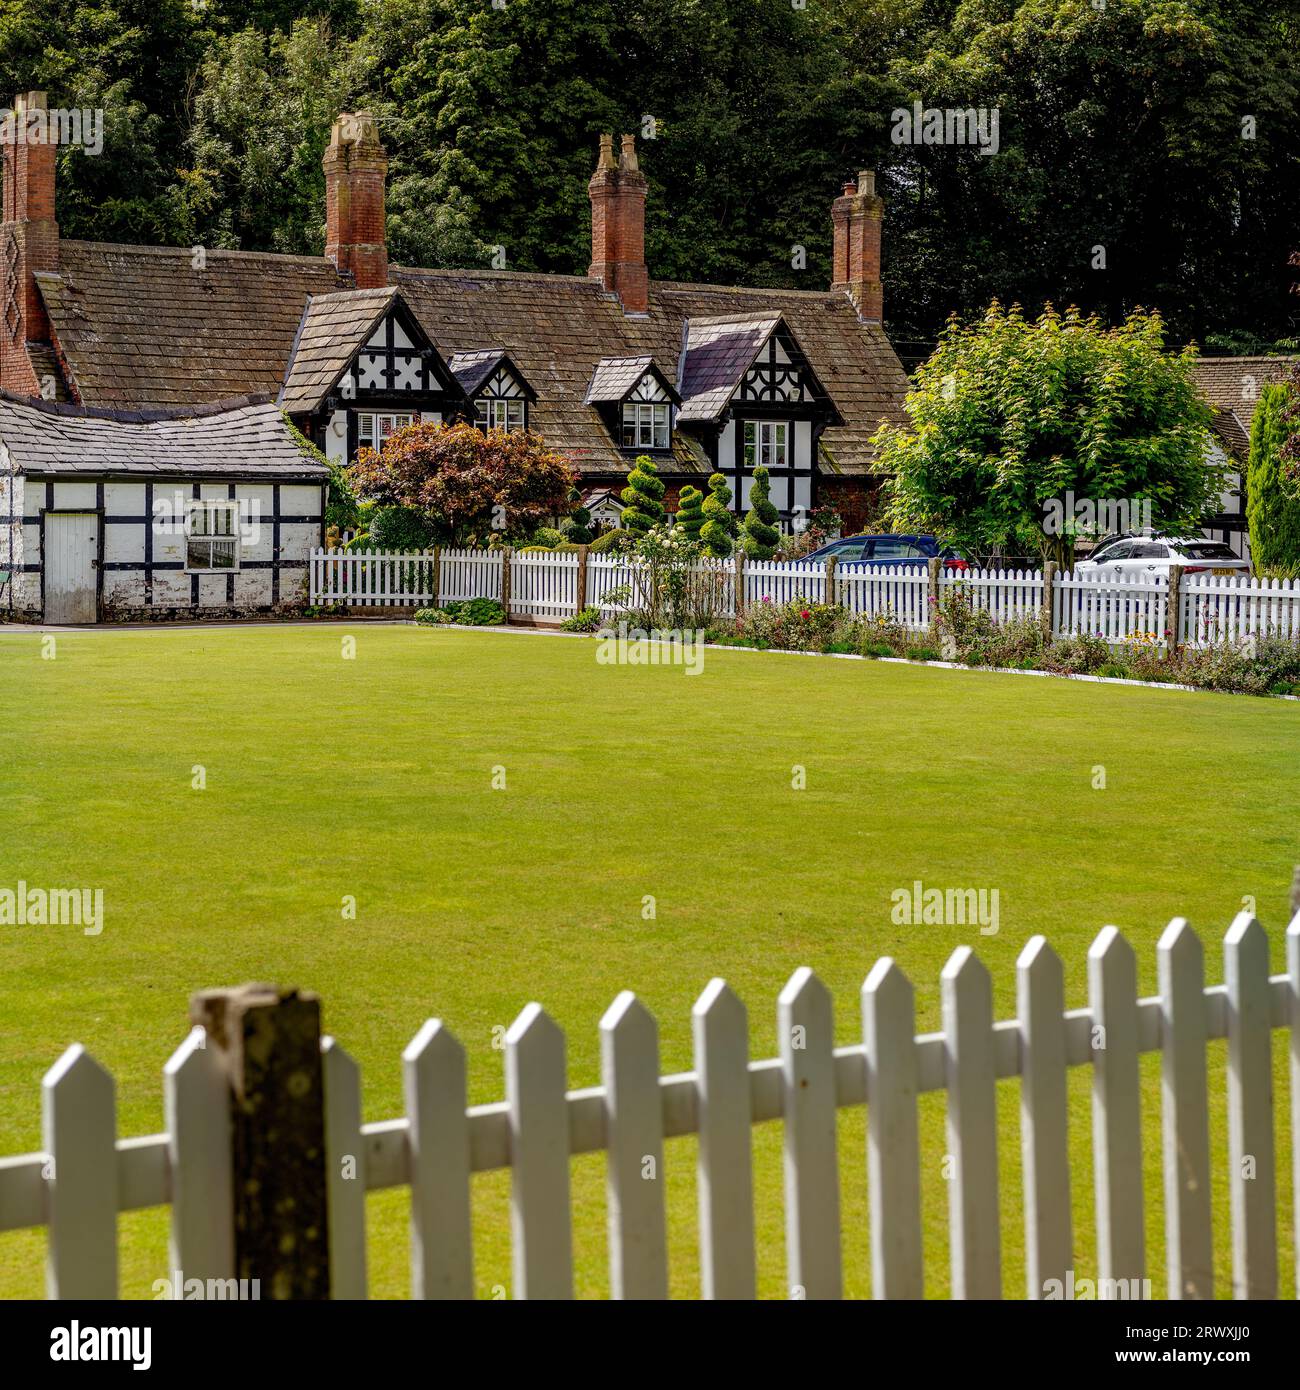 Bowling green with white picket fence and traditional country cottages behind in the English countryside Stock Photo